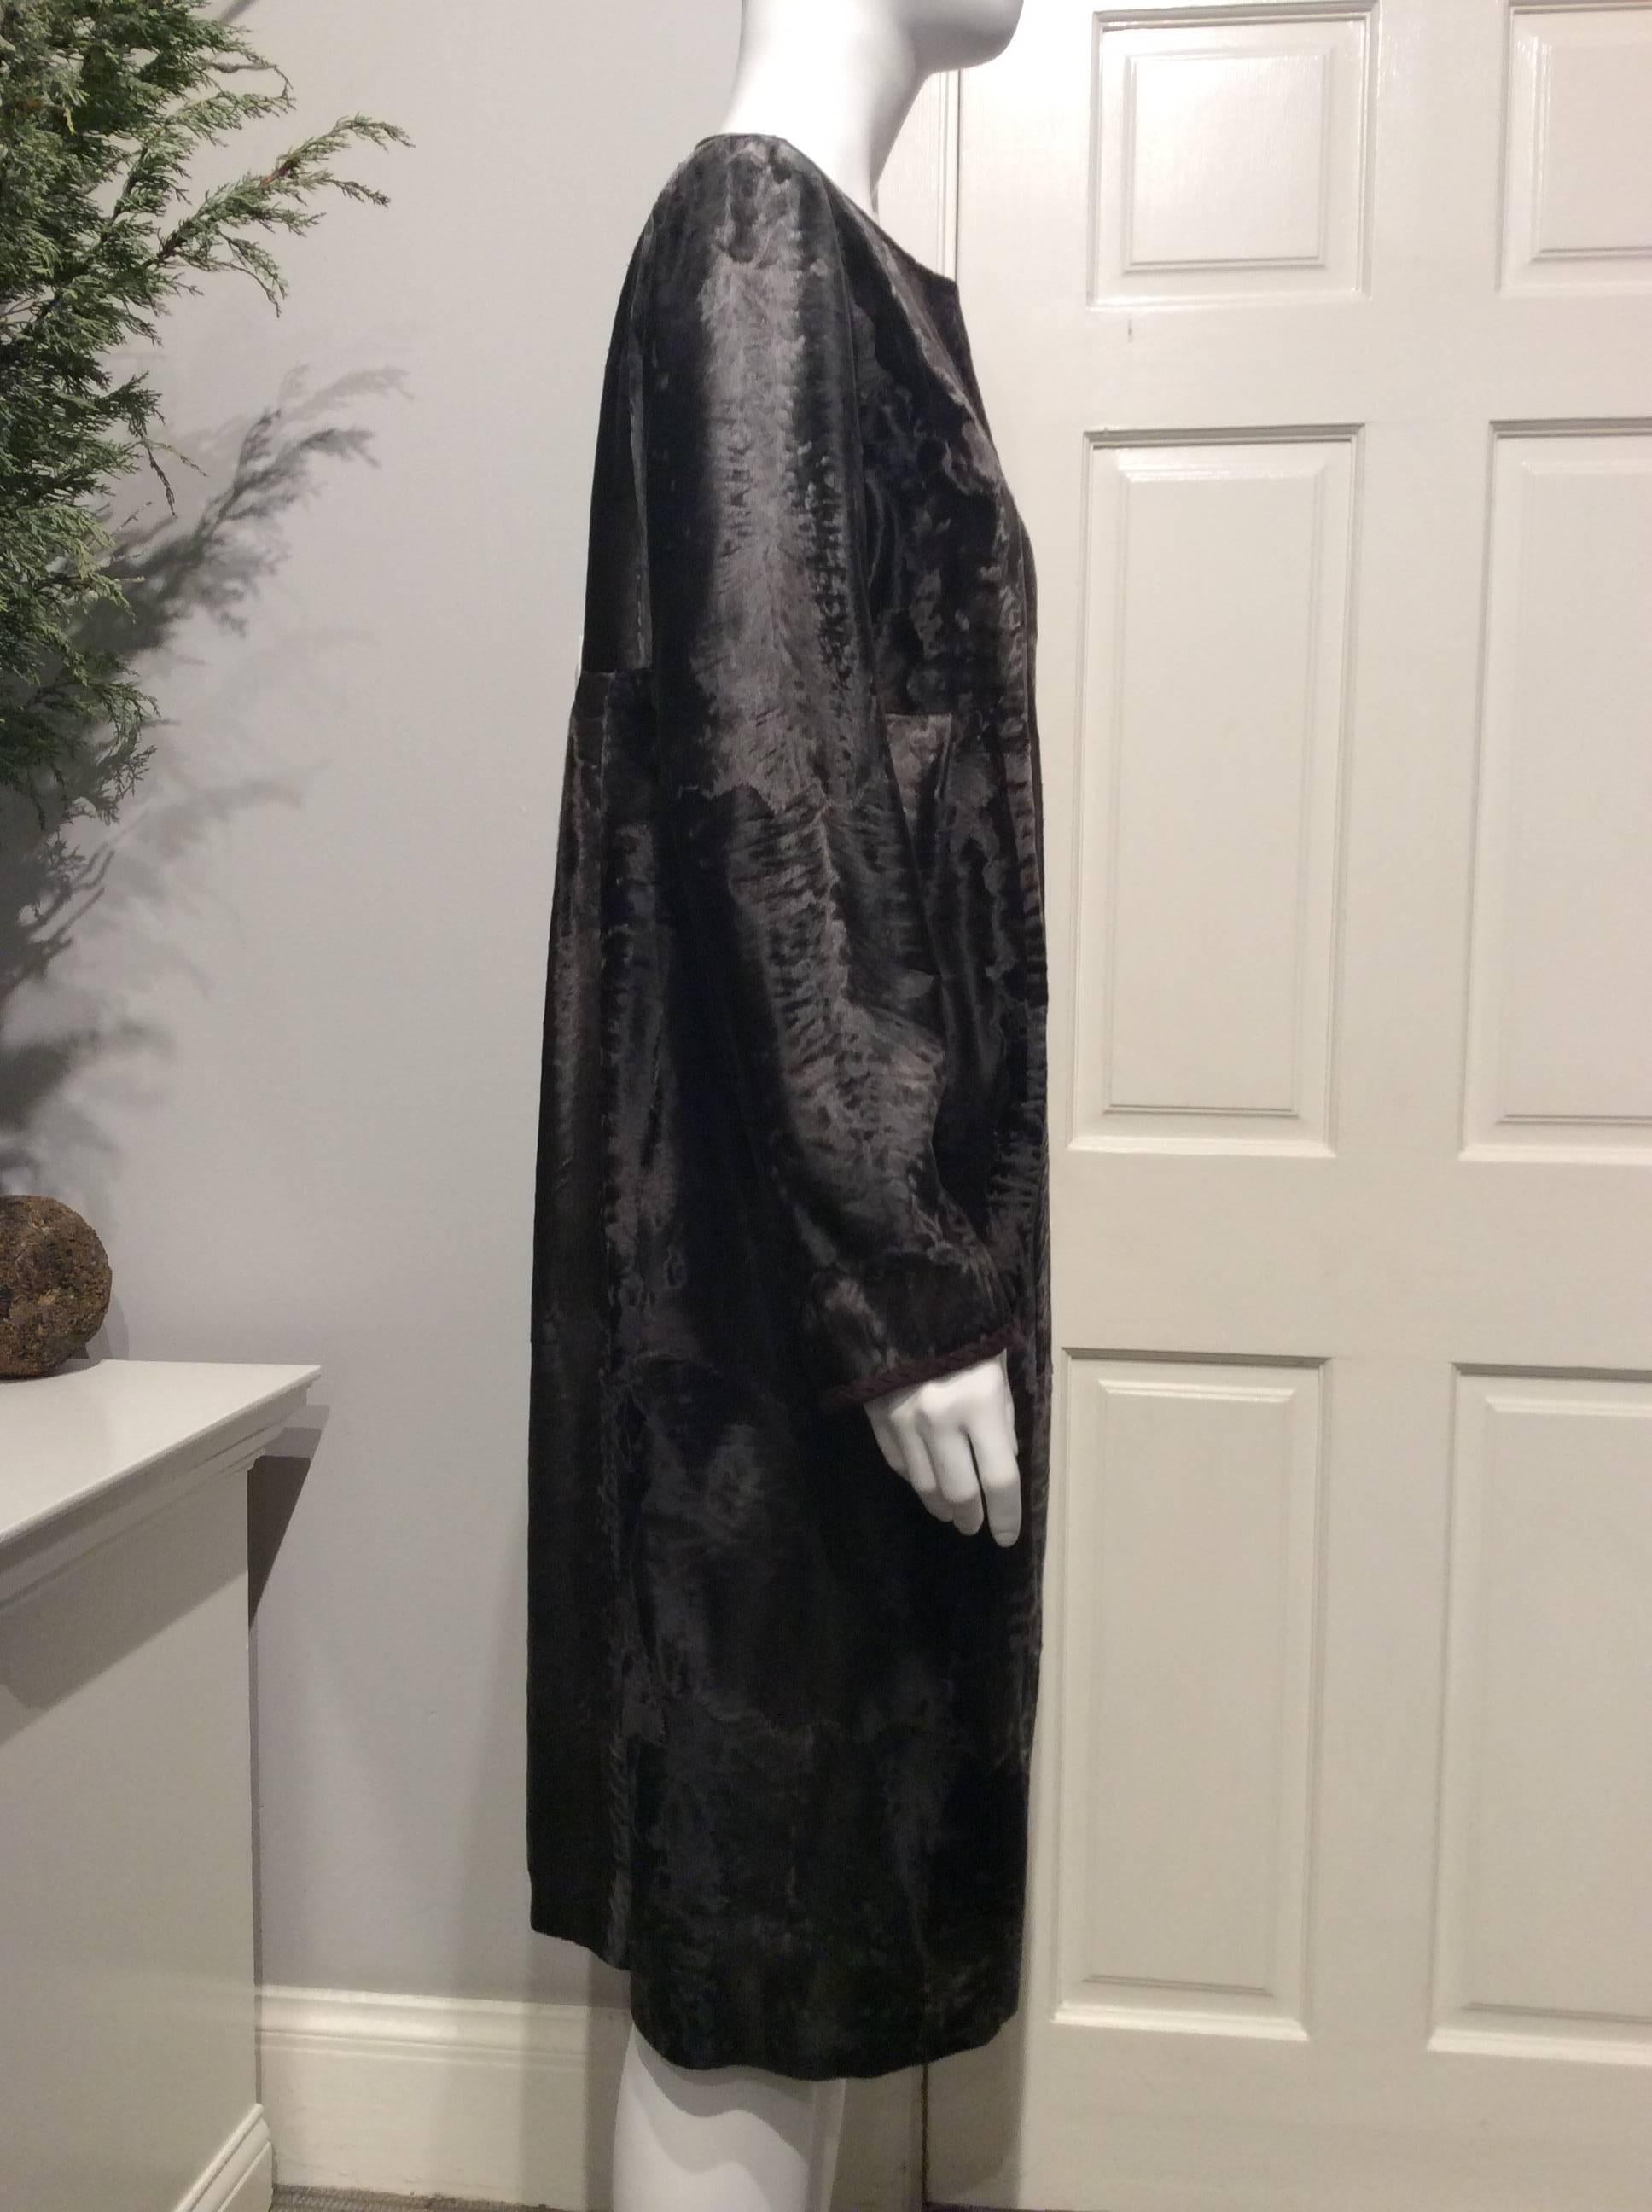 J. Mendel grey-brown Broadtail high waisted coat with four flat pleats in the front and back. It has two seam pockets. It has a trim of dark brown sheared mink inside. This coat closes with five fabric covered oversized snaps. Inside, displays an